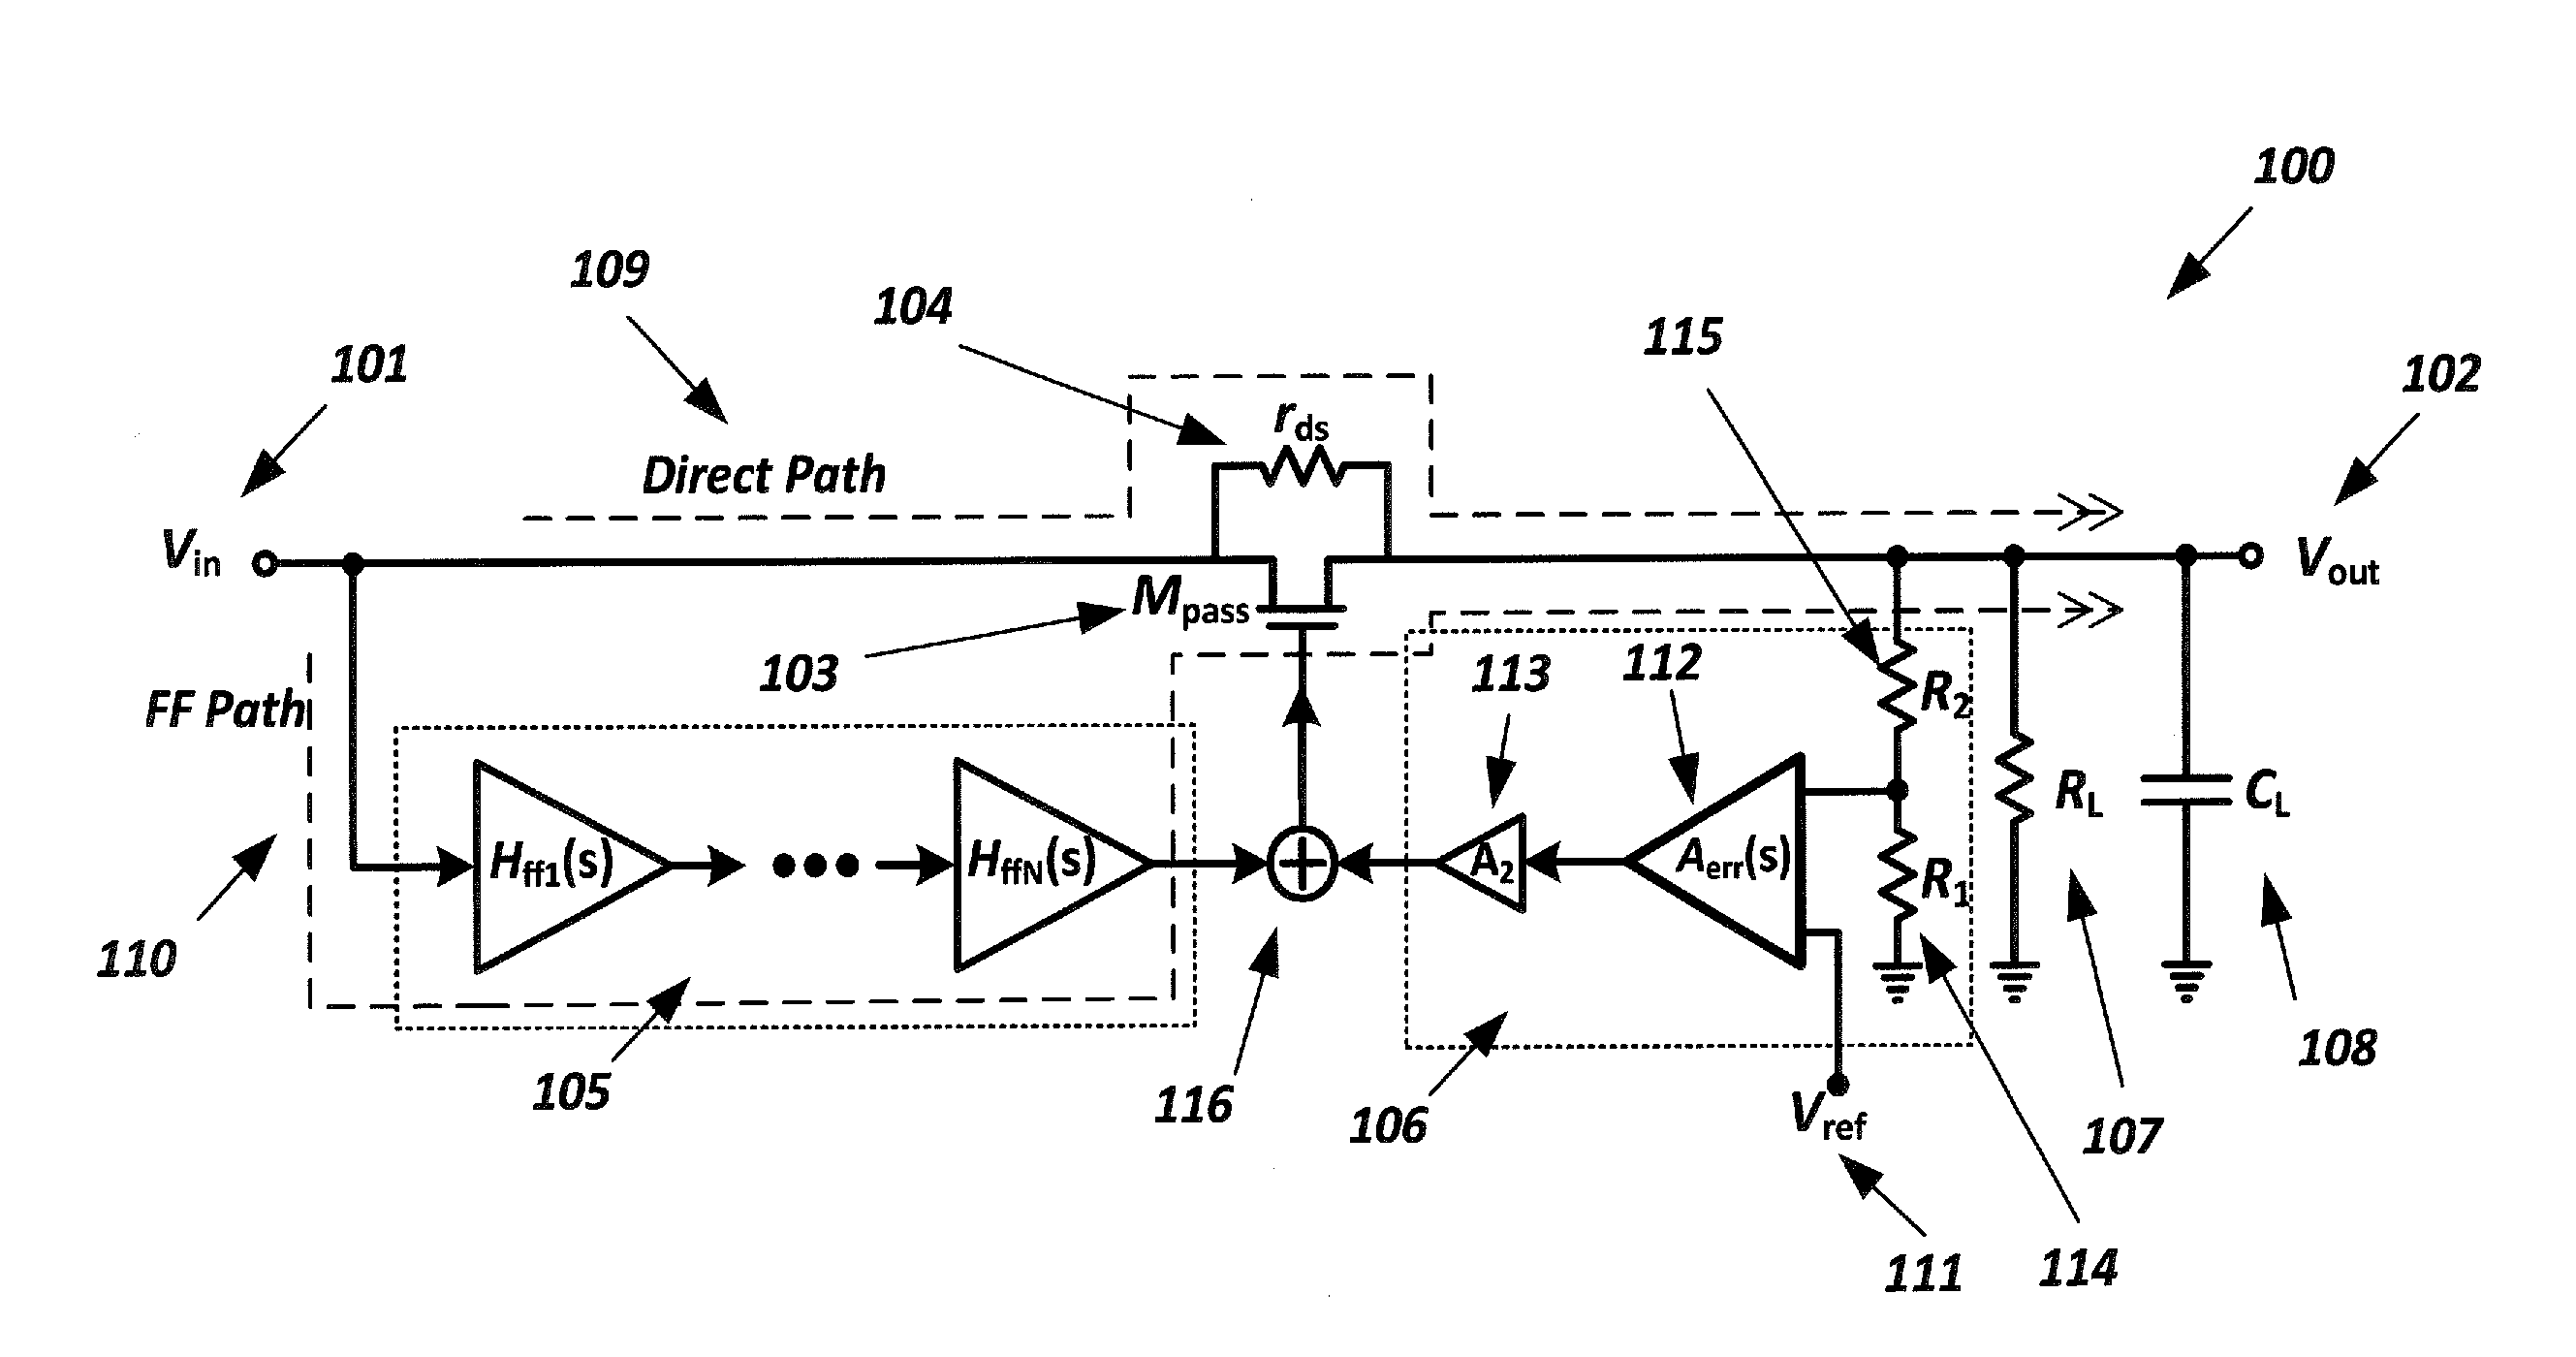 Power supply rejection for voltage regulators using a passive feed-forward network